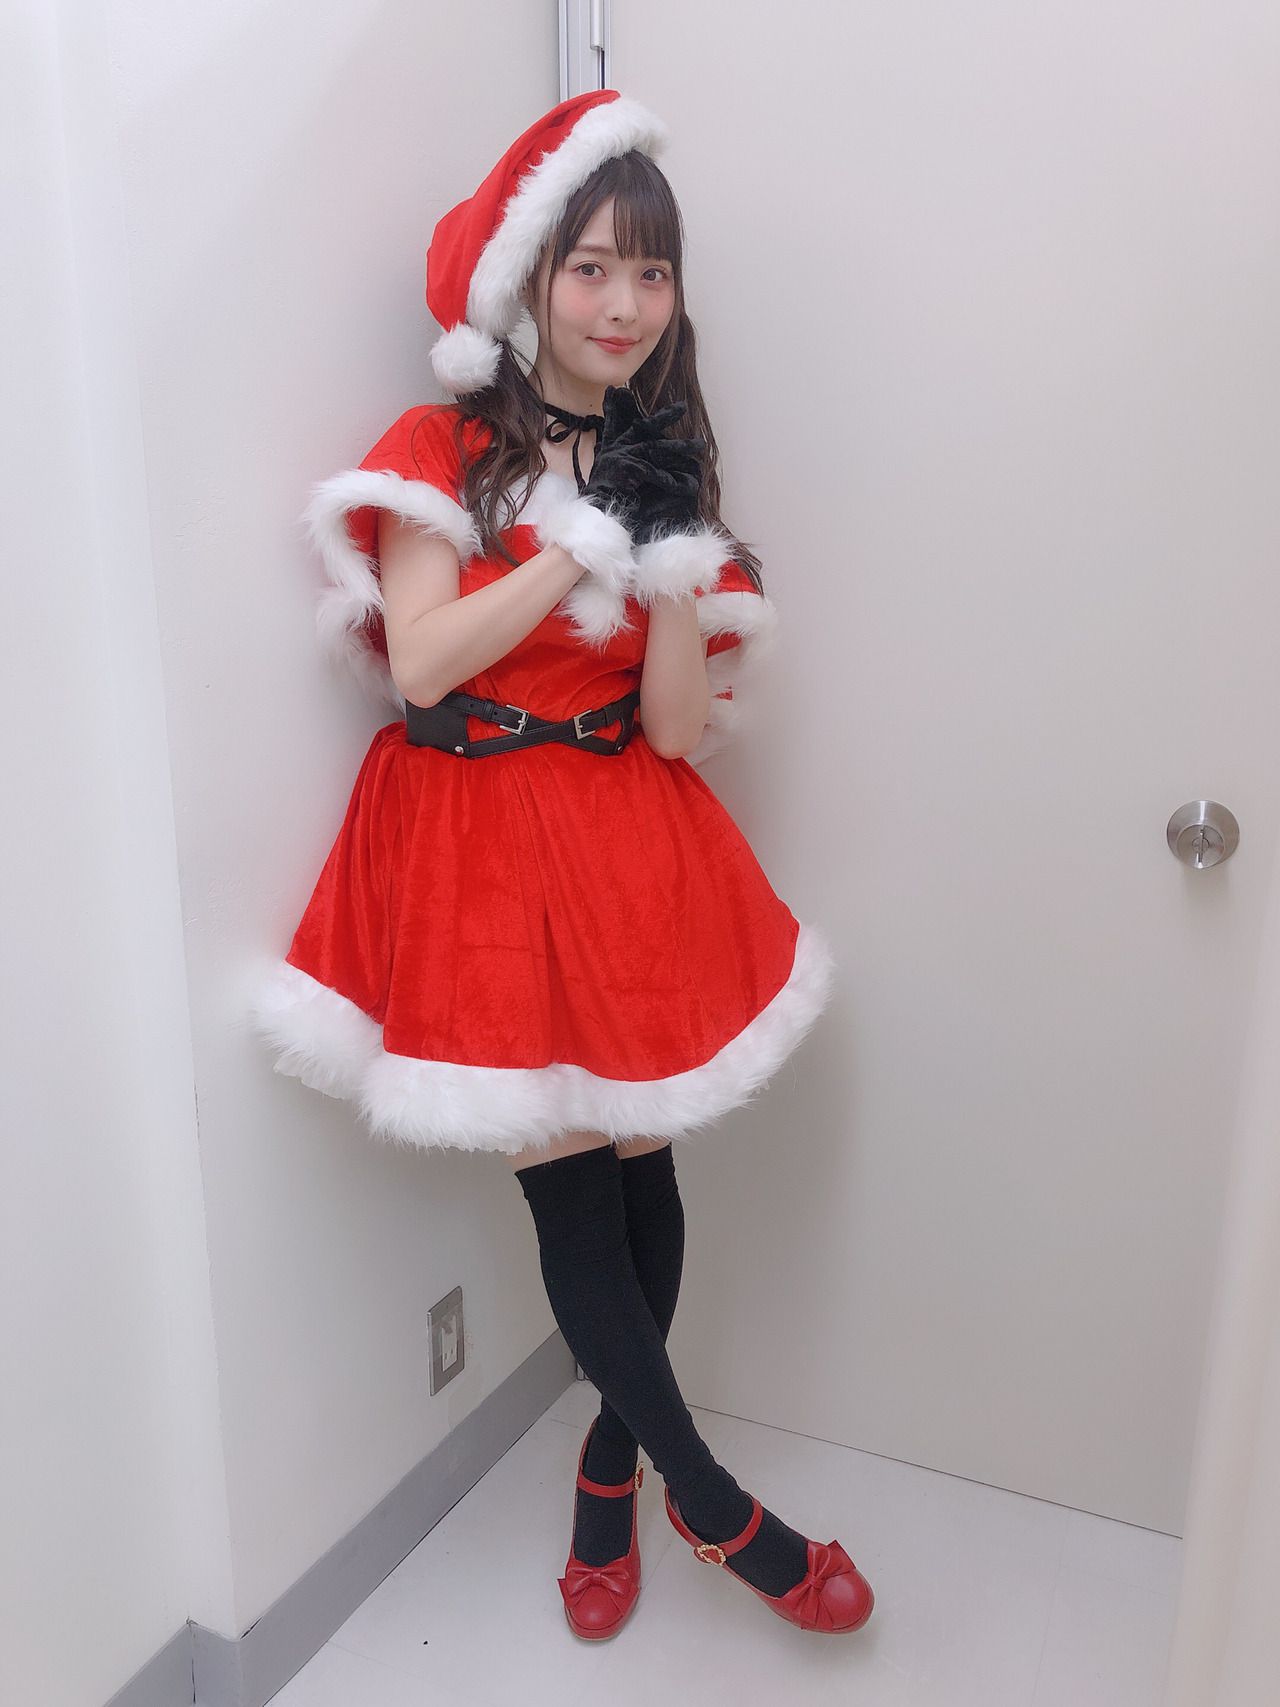 Sumire Uesaka "to emphasize the thigh... W] also erotic image offer Wwwwwww 11